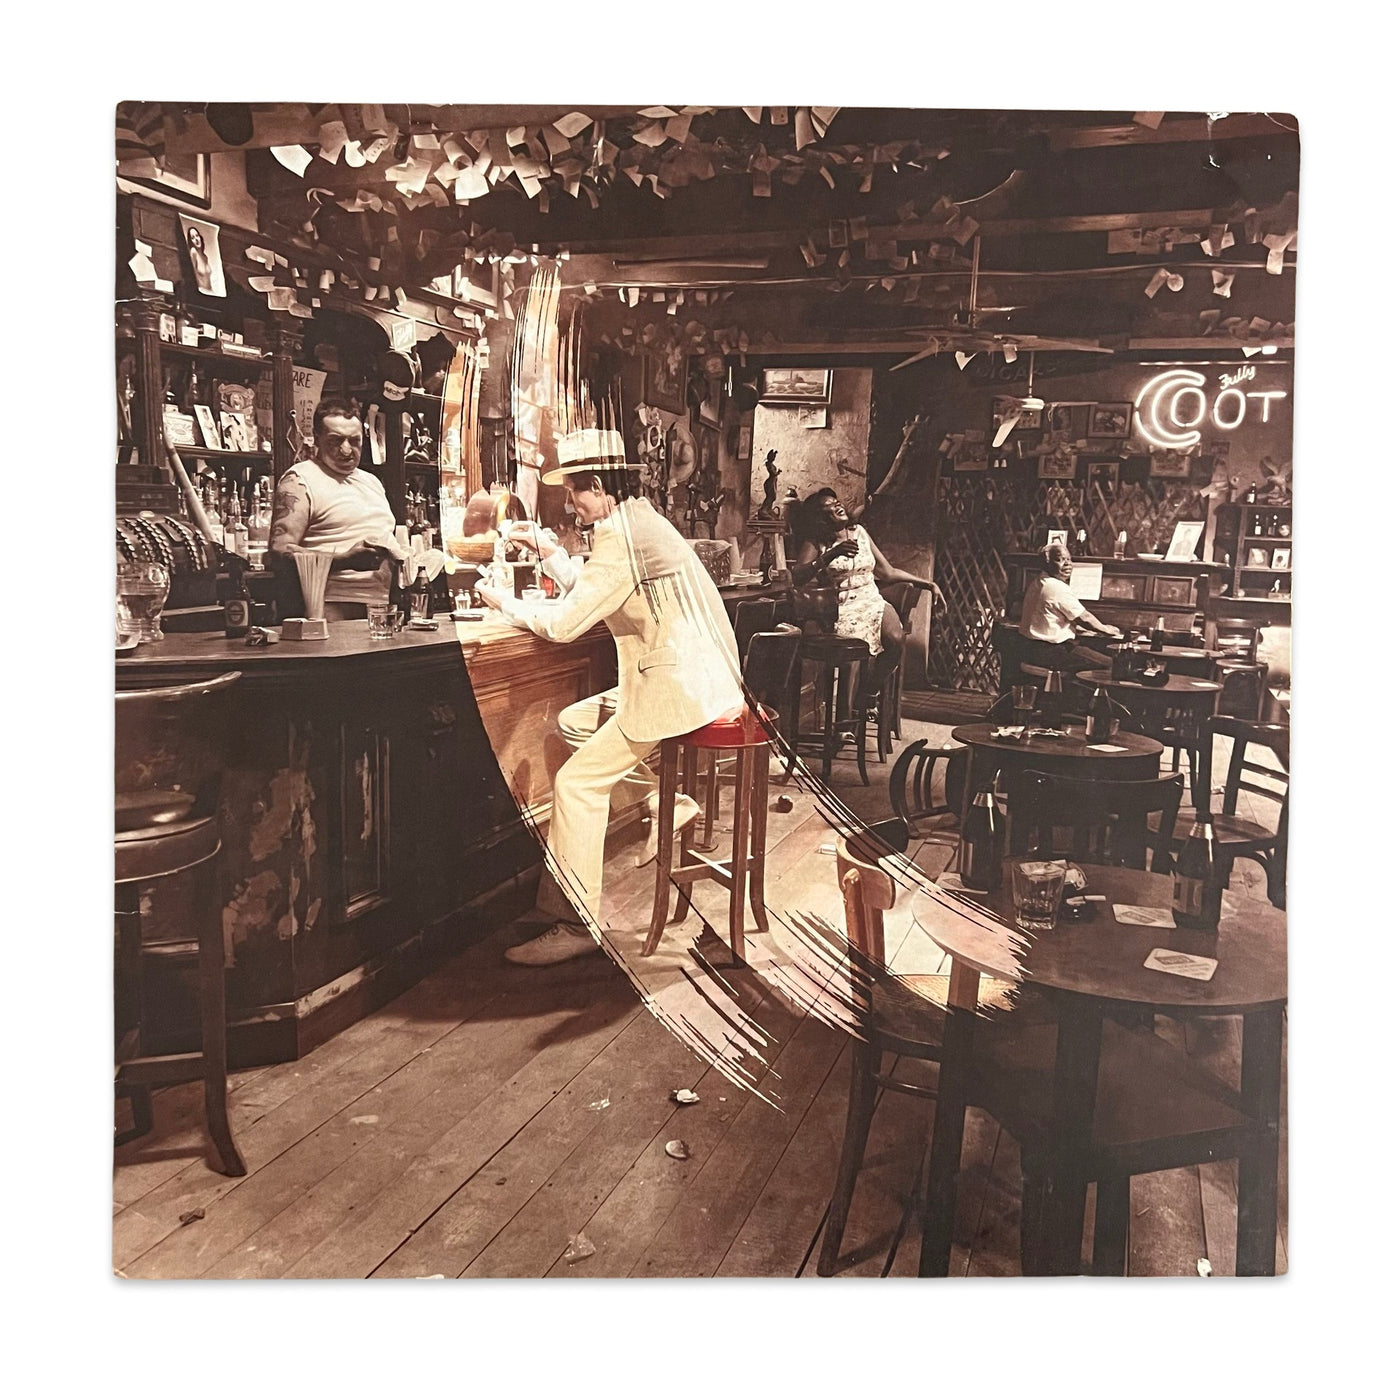 Led Zeppelin – In Through The Out Door (2015 Remastered Deluxe Edition, 180 Gram)